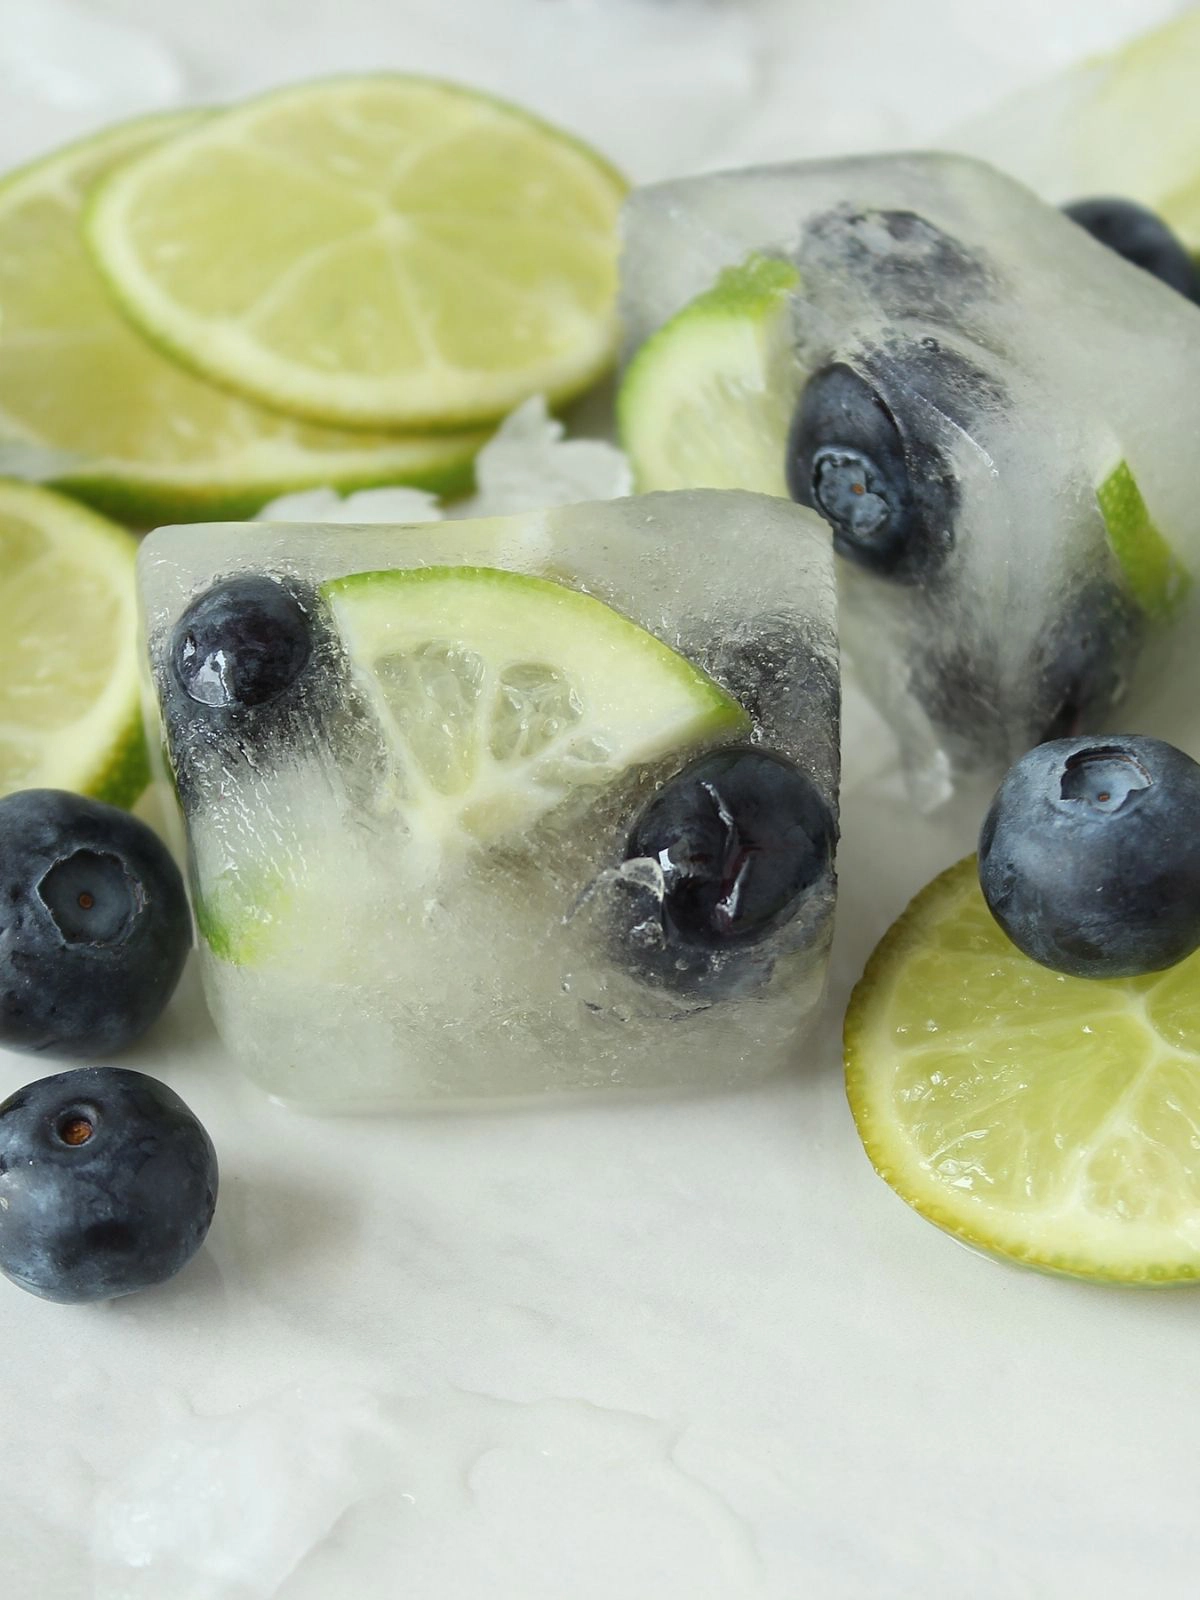  Limes and Blueberries in Ice Cubes